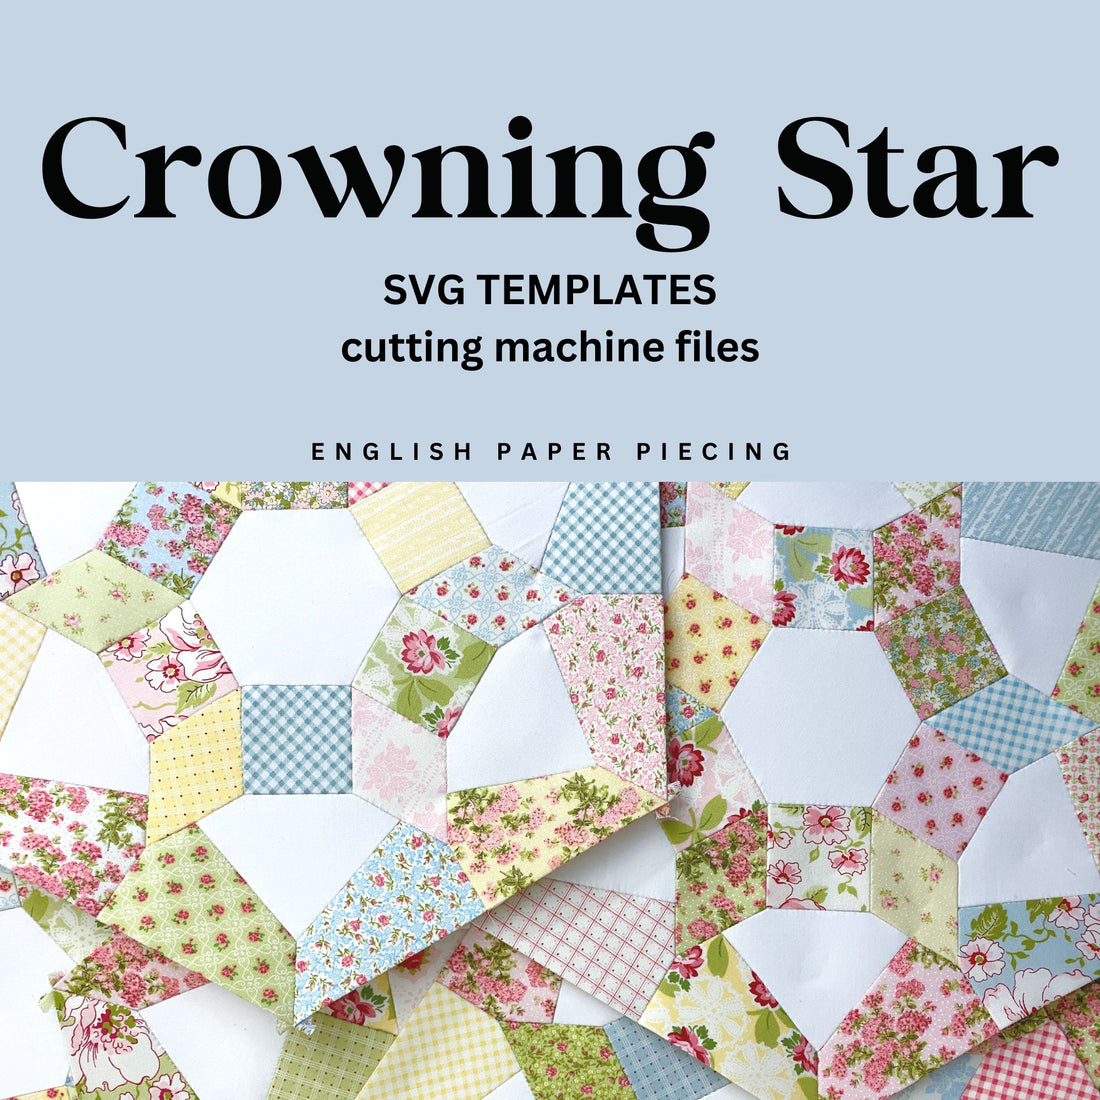 Crowning Star Quilt SVG templates